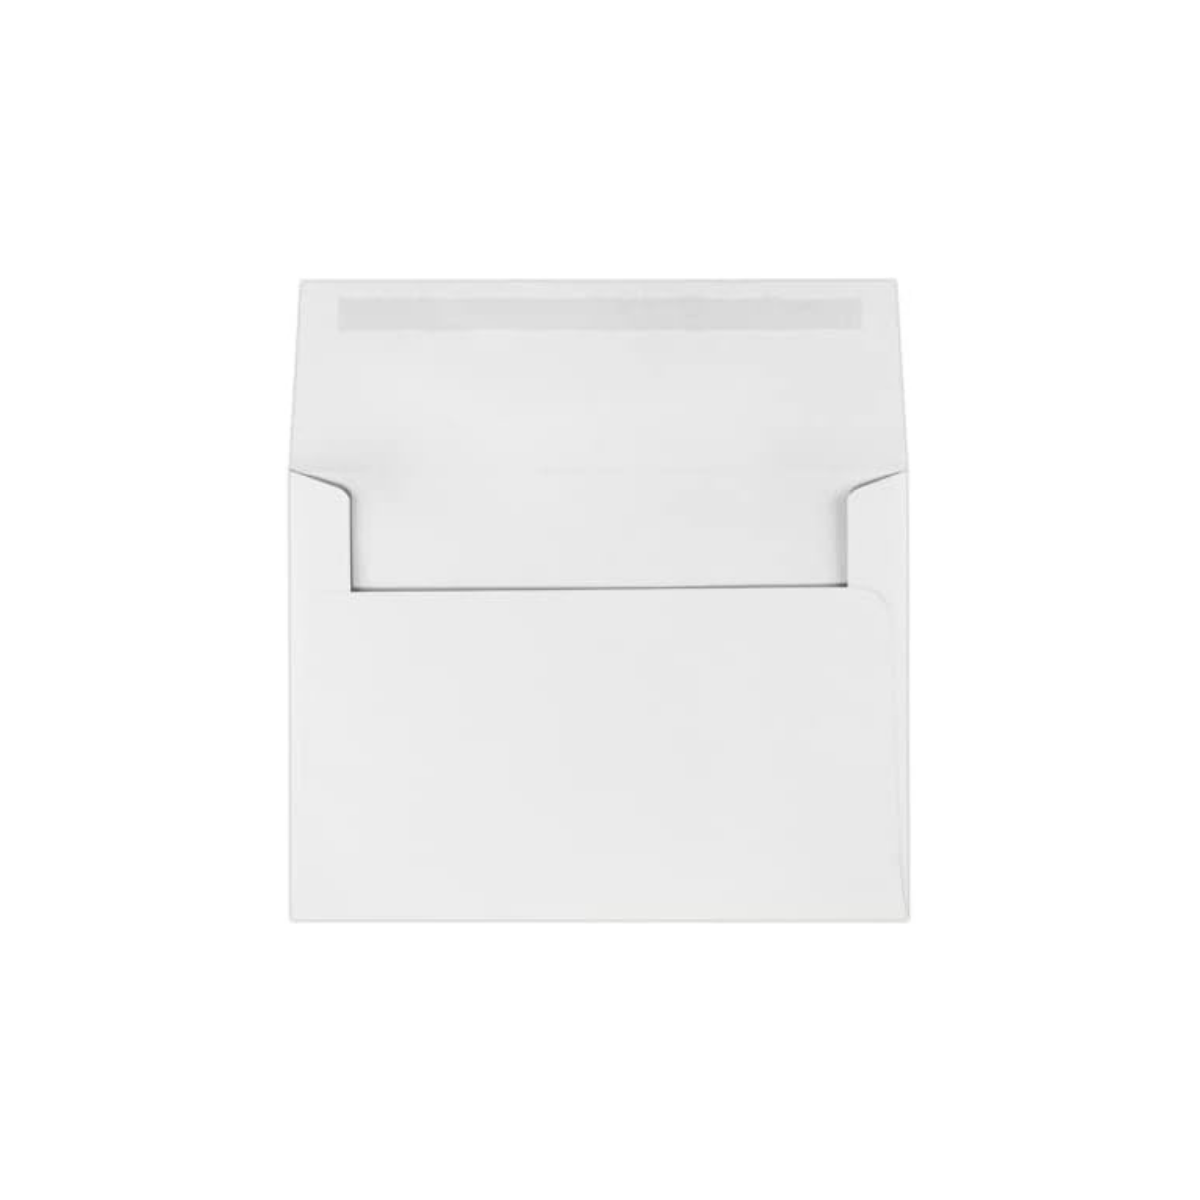 Reskid 50-Pack of Heavyweight White Blank Cards With Envelopes - 7" x 10" Folded To 5"x 7" Blank Greeting Cards And A7 Envelopes - Printable Note Cards With Envelopes (5x7, inches)